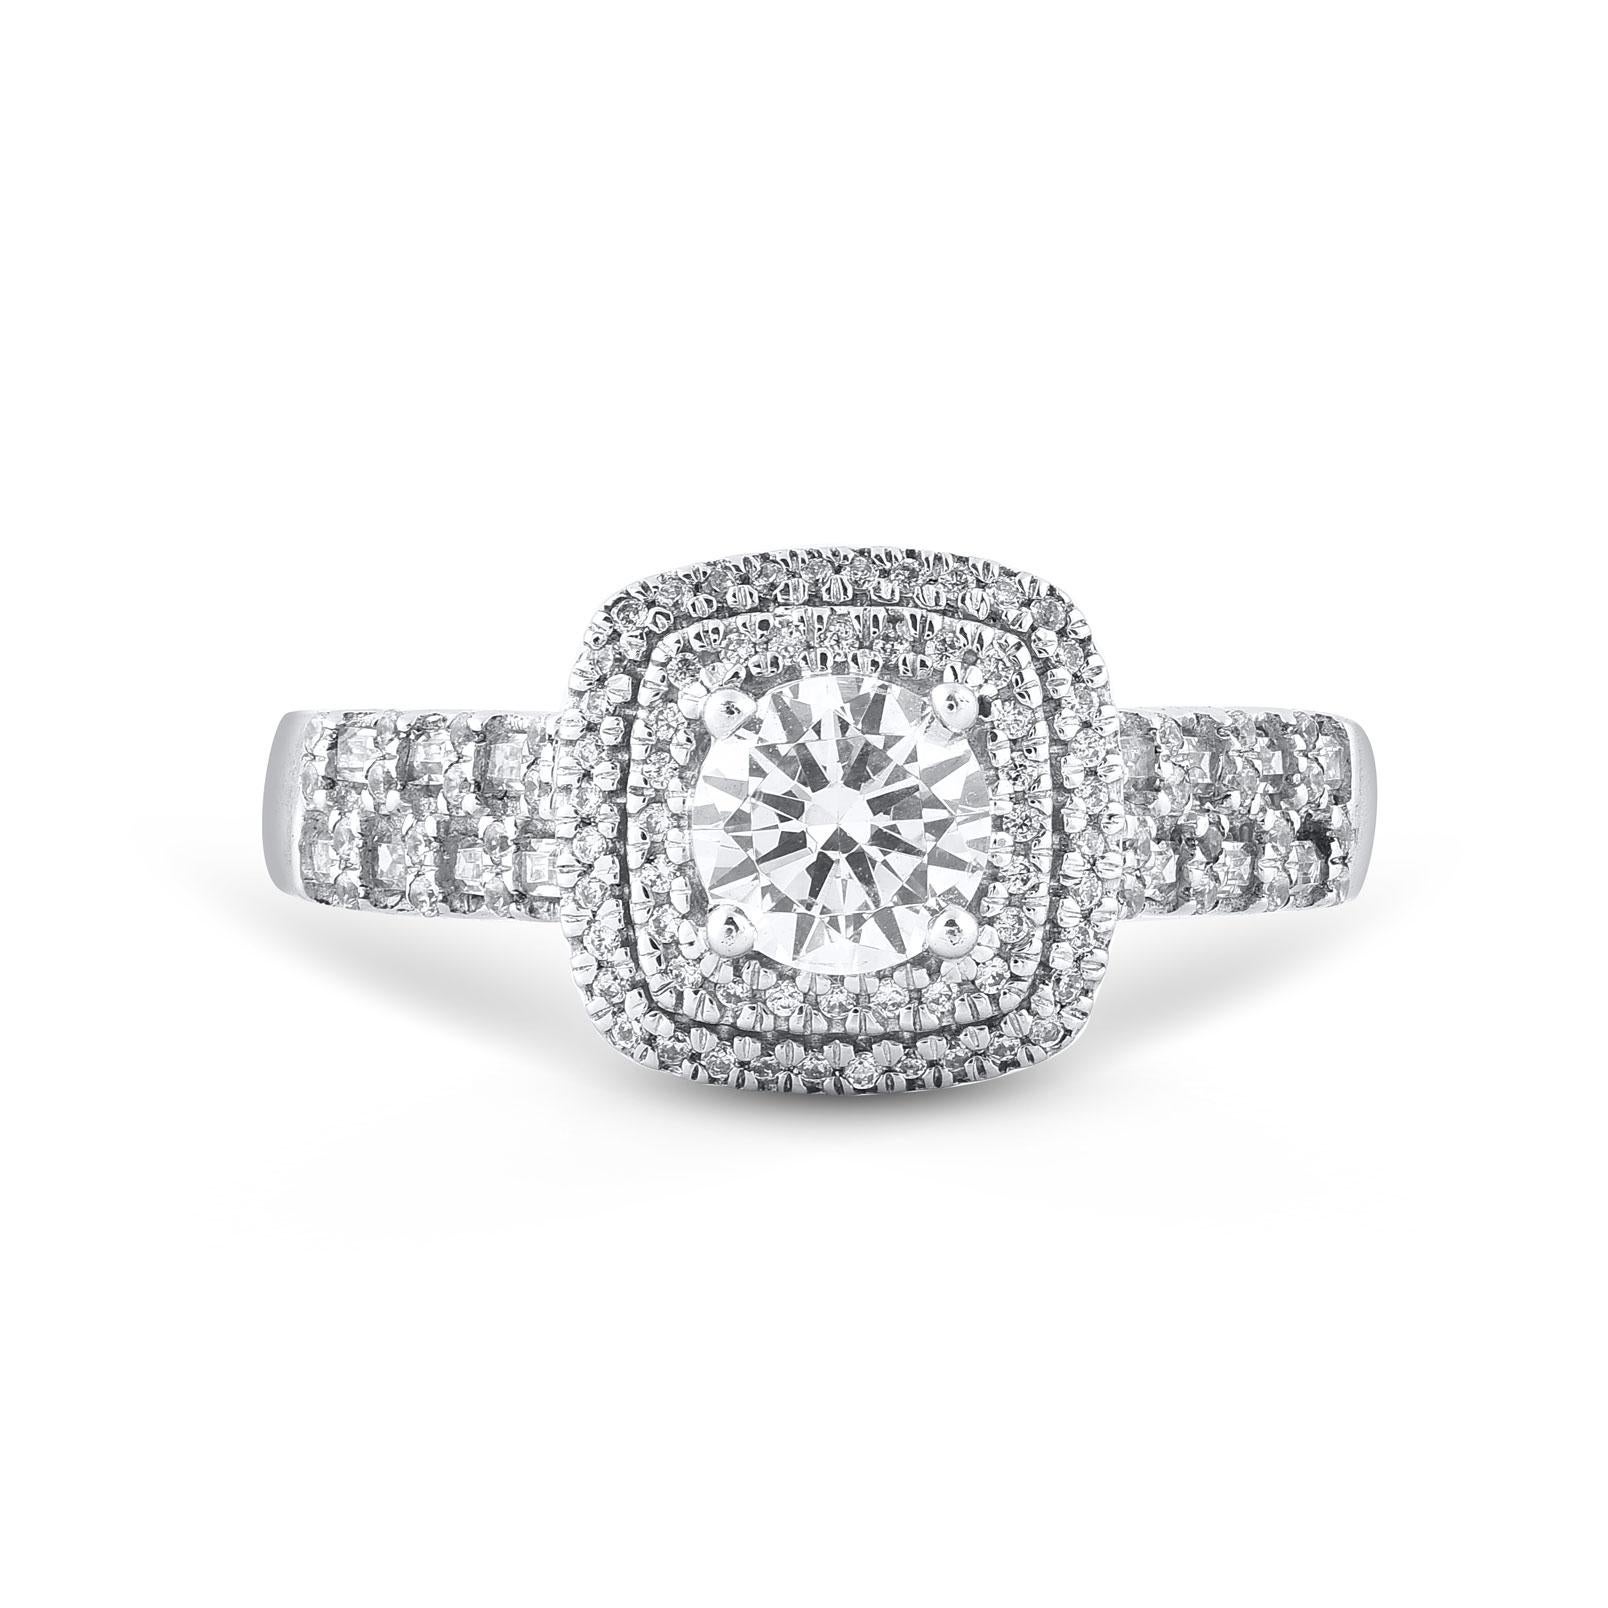 Elegant and graceful, this diamond ring is beautifully crafted in 14KT white gold. These diamond ring are studded with 117 single cut, brilliant cut round diamonds and baguette cut diamonds in prong, pave and channel setting. The white diamonds are